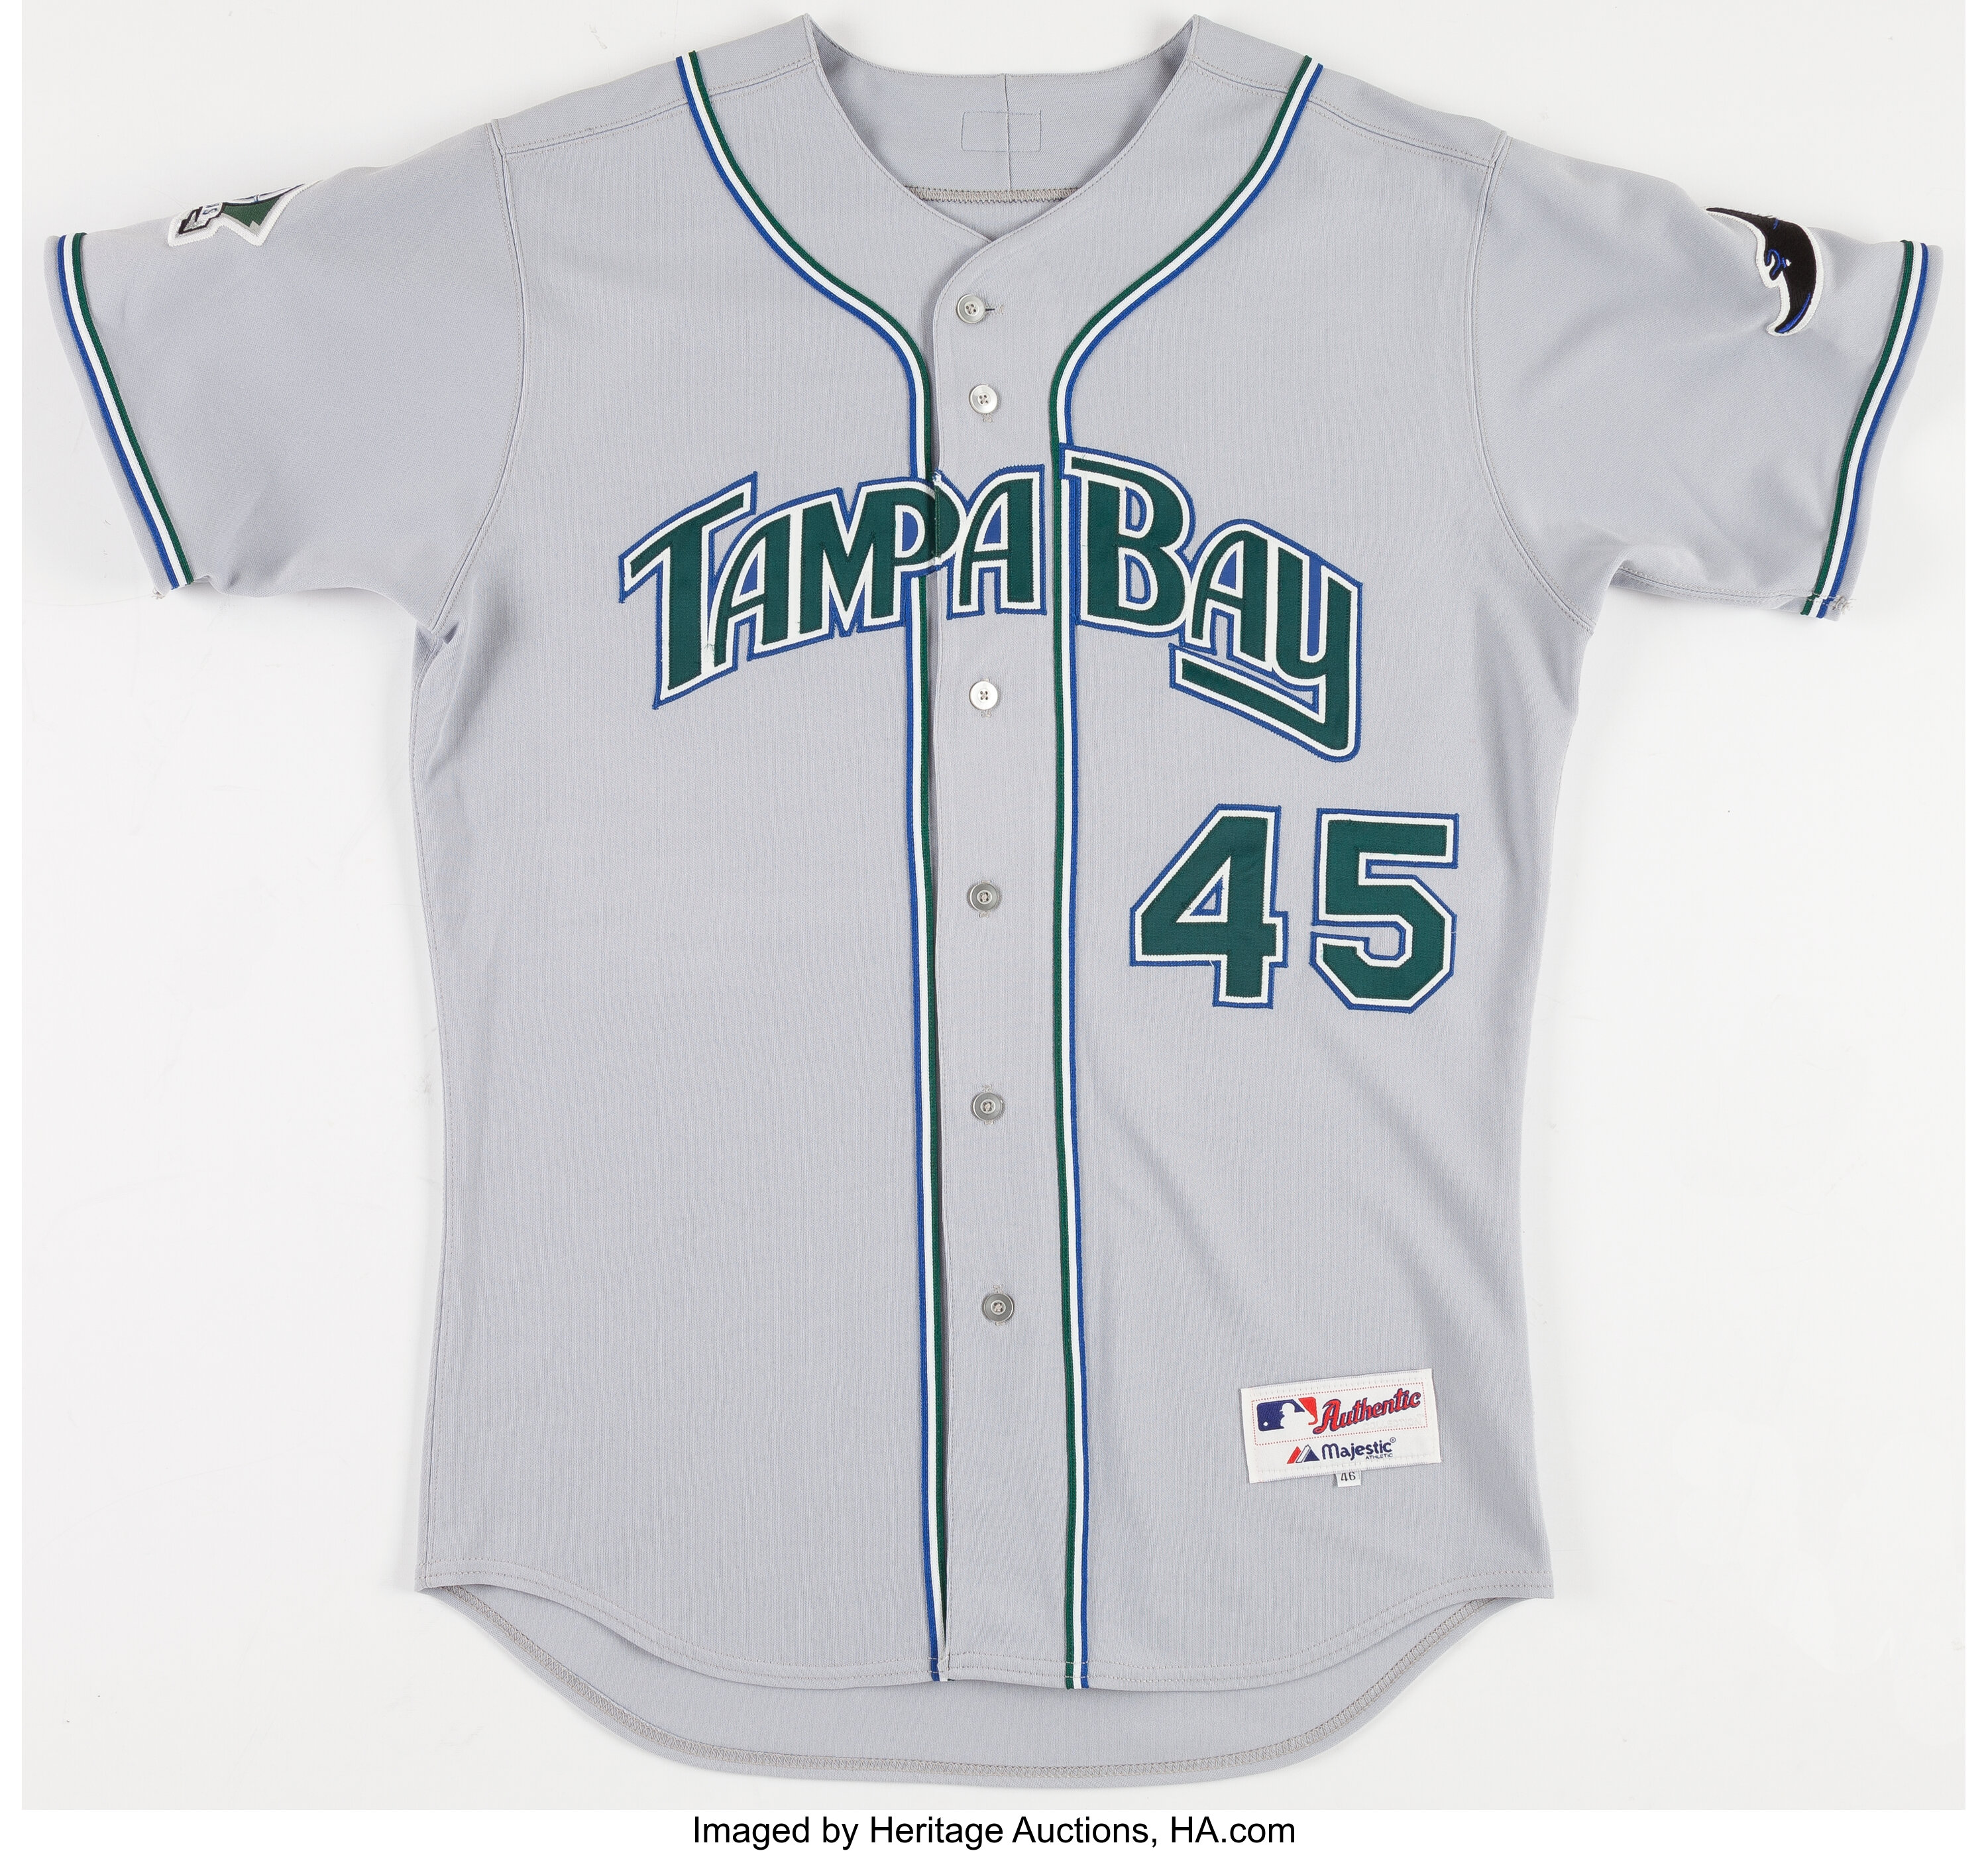 2001-04 Tampa Bay Devil Rays Blank Game Issued White Jersey DP06043 - Game  Used MLB Jerseys at 's Sports Collectibles Store